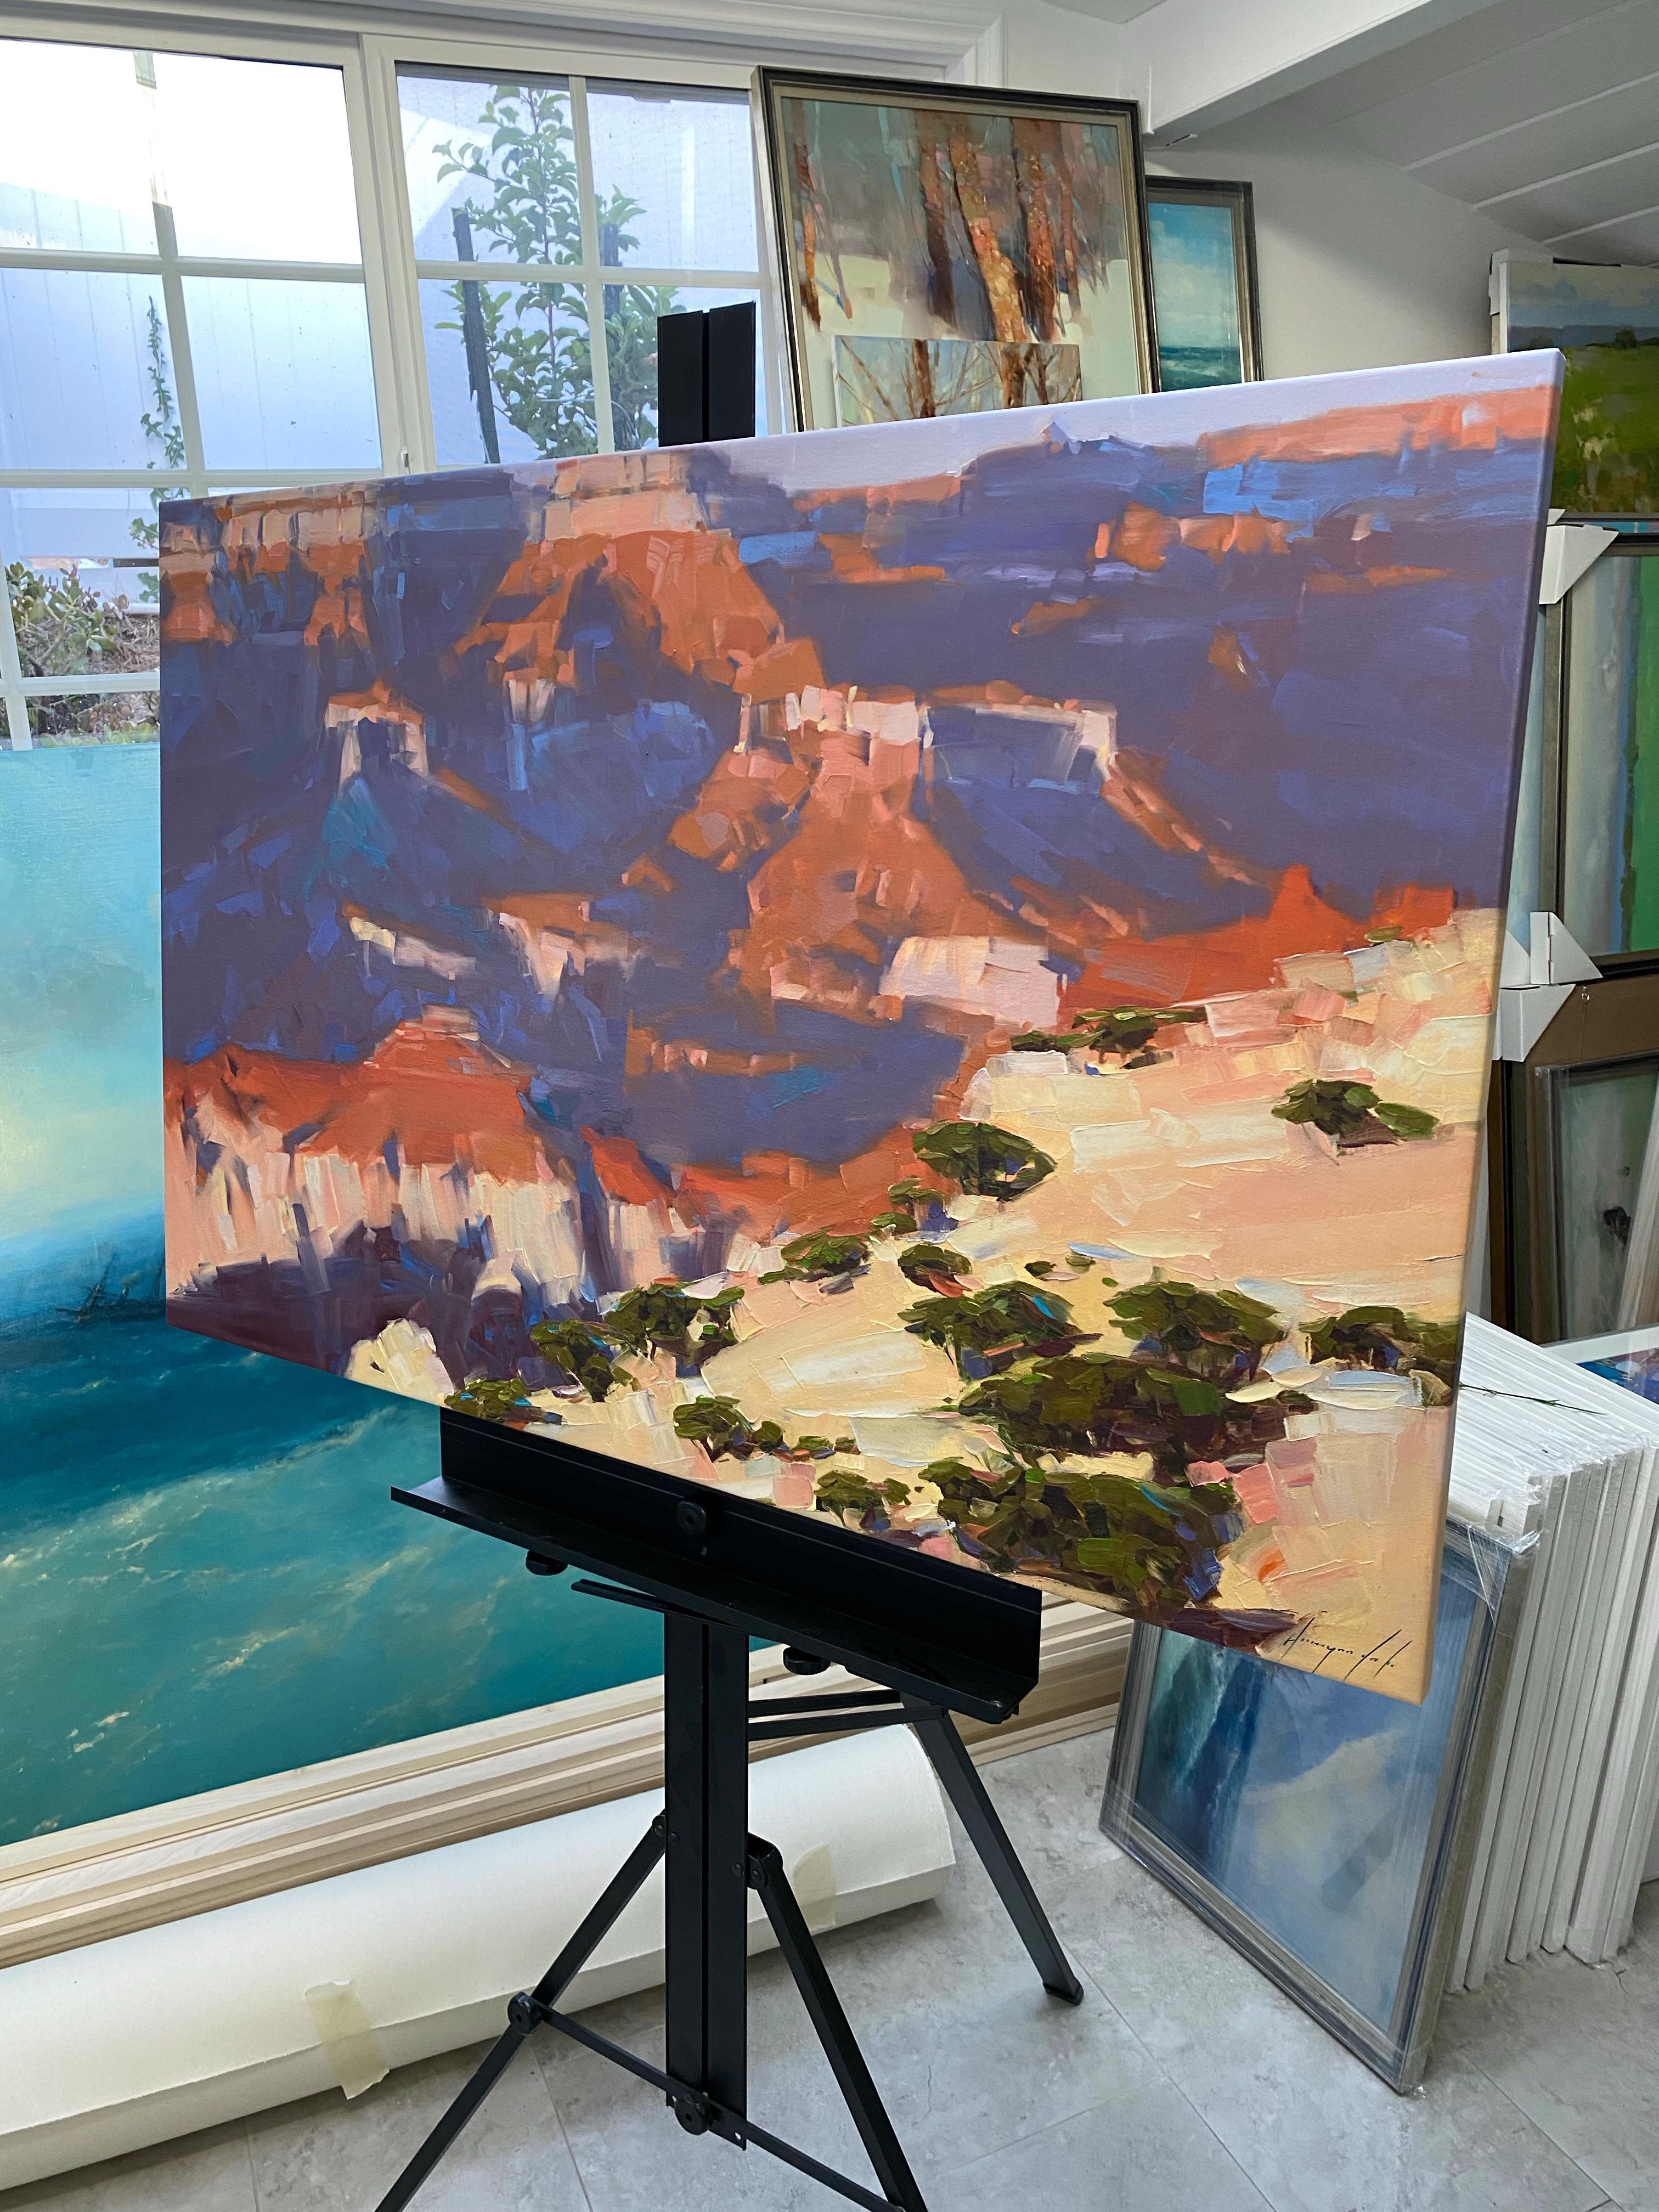 Artist: Vahe Yeremyan 
Work: Original Oil Painting, Handmade Artwork, One of a Kind 
Medium: Oil on Canvas 
Year: 2019
Style: Impressionism, 
Subject: Grand Canyon,
Size: 26.5